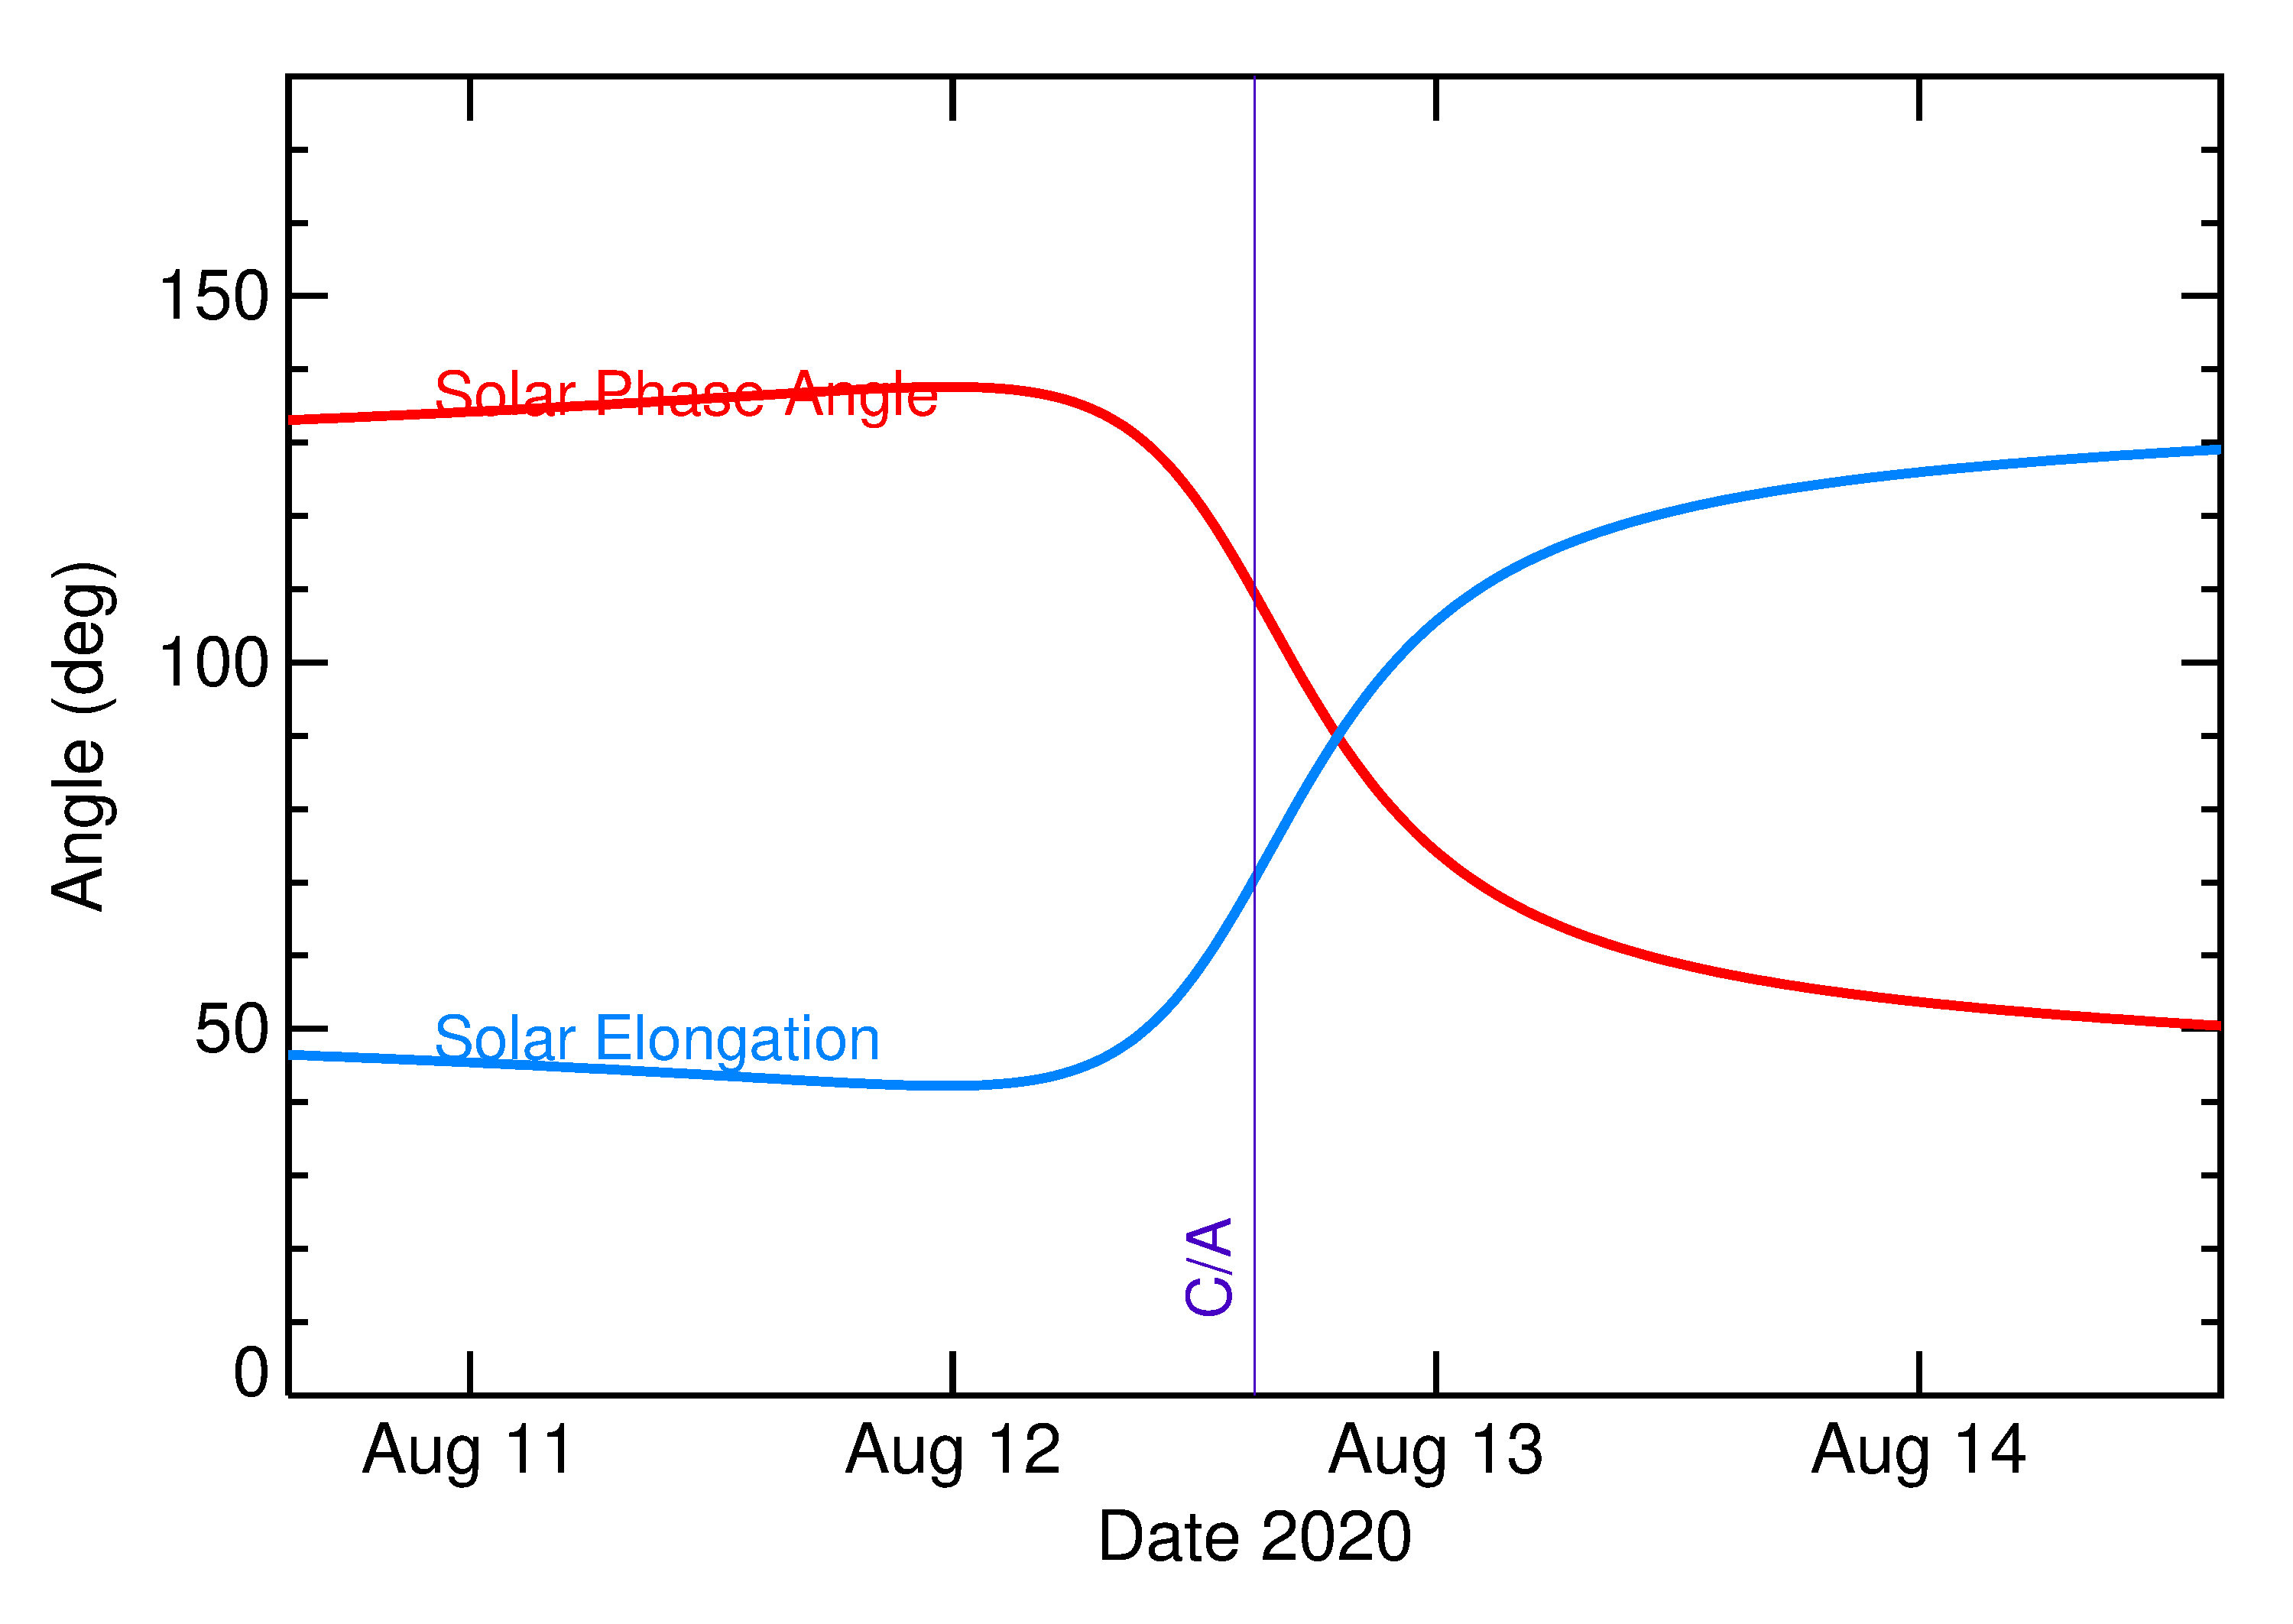 Solar Elongation and Solar Phase Angle of 2020 QJ5 in the days around closest approach